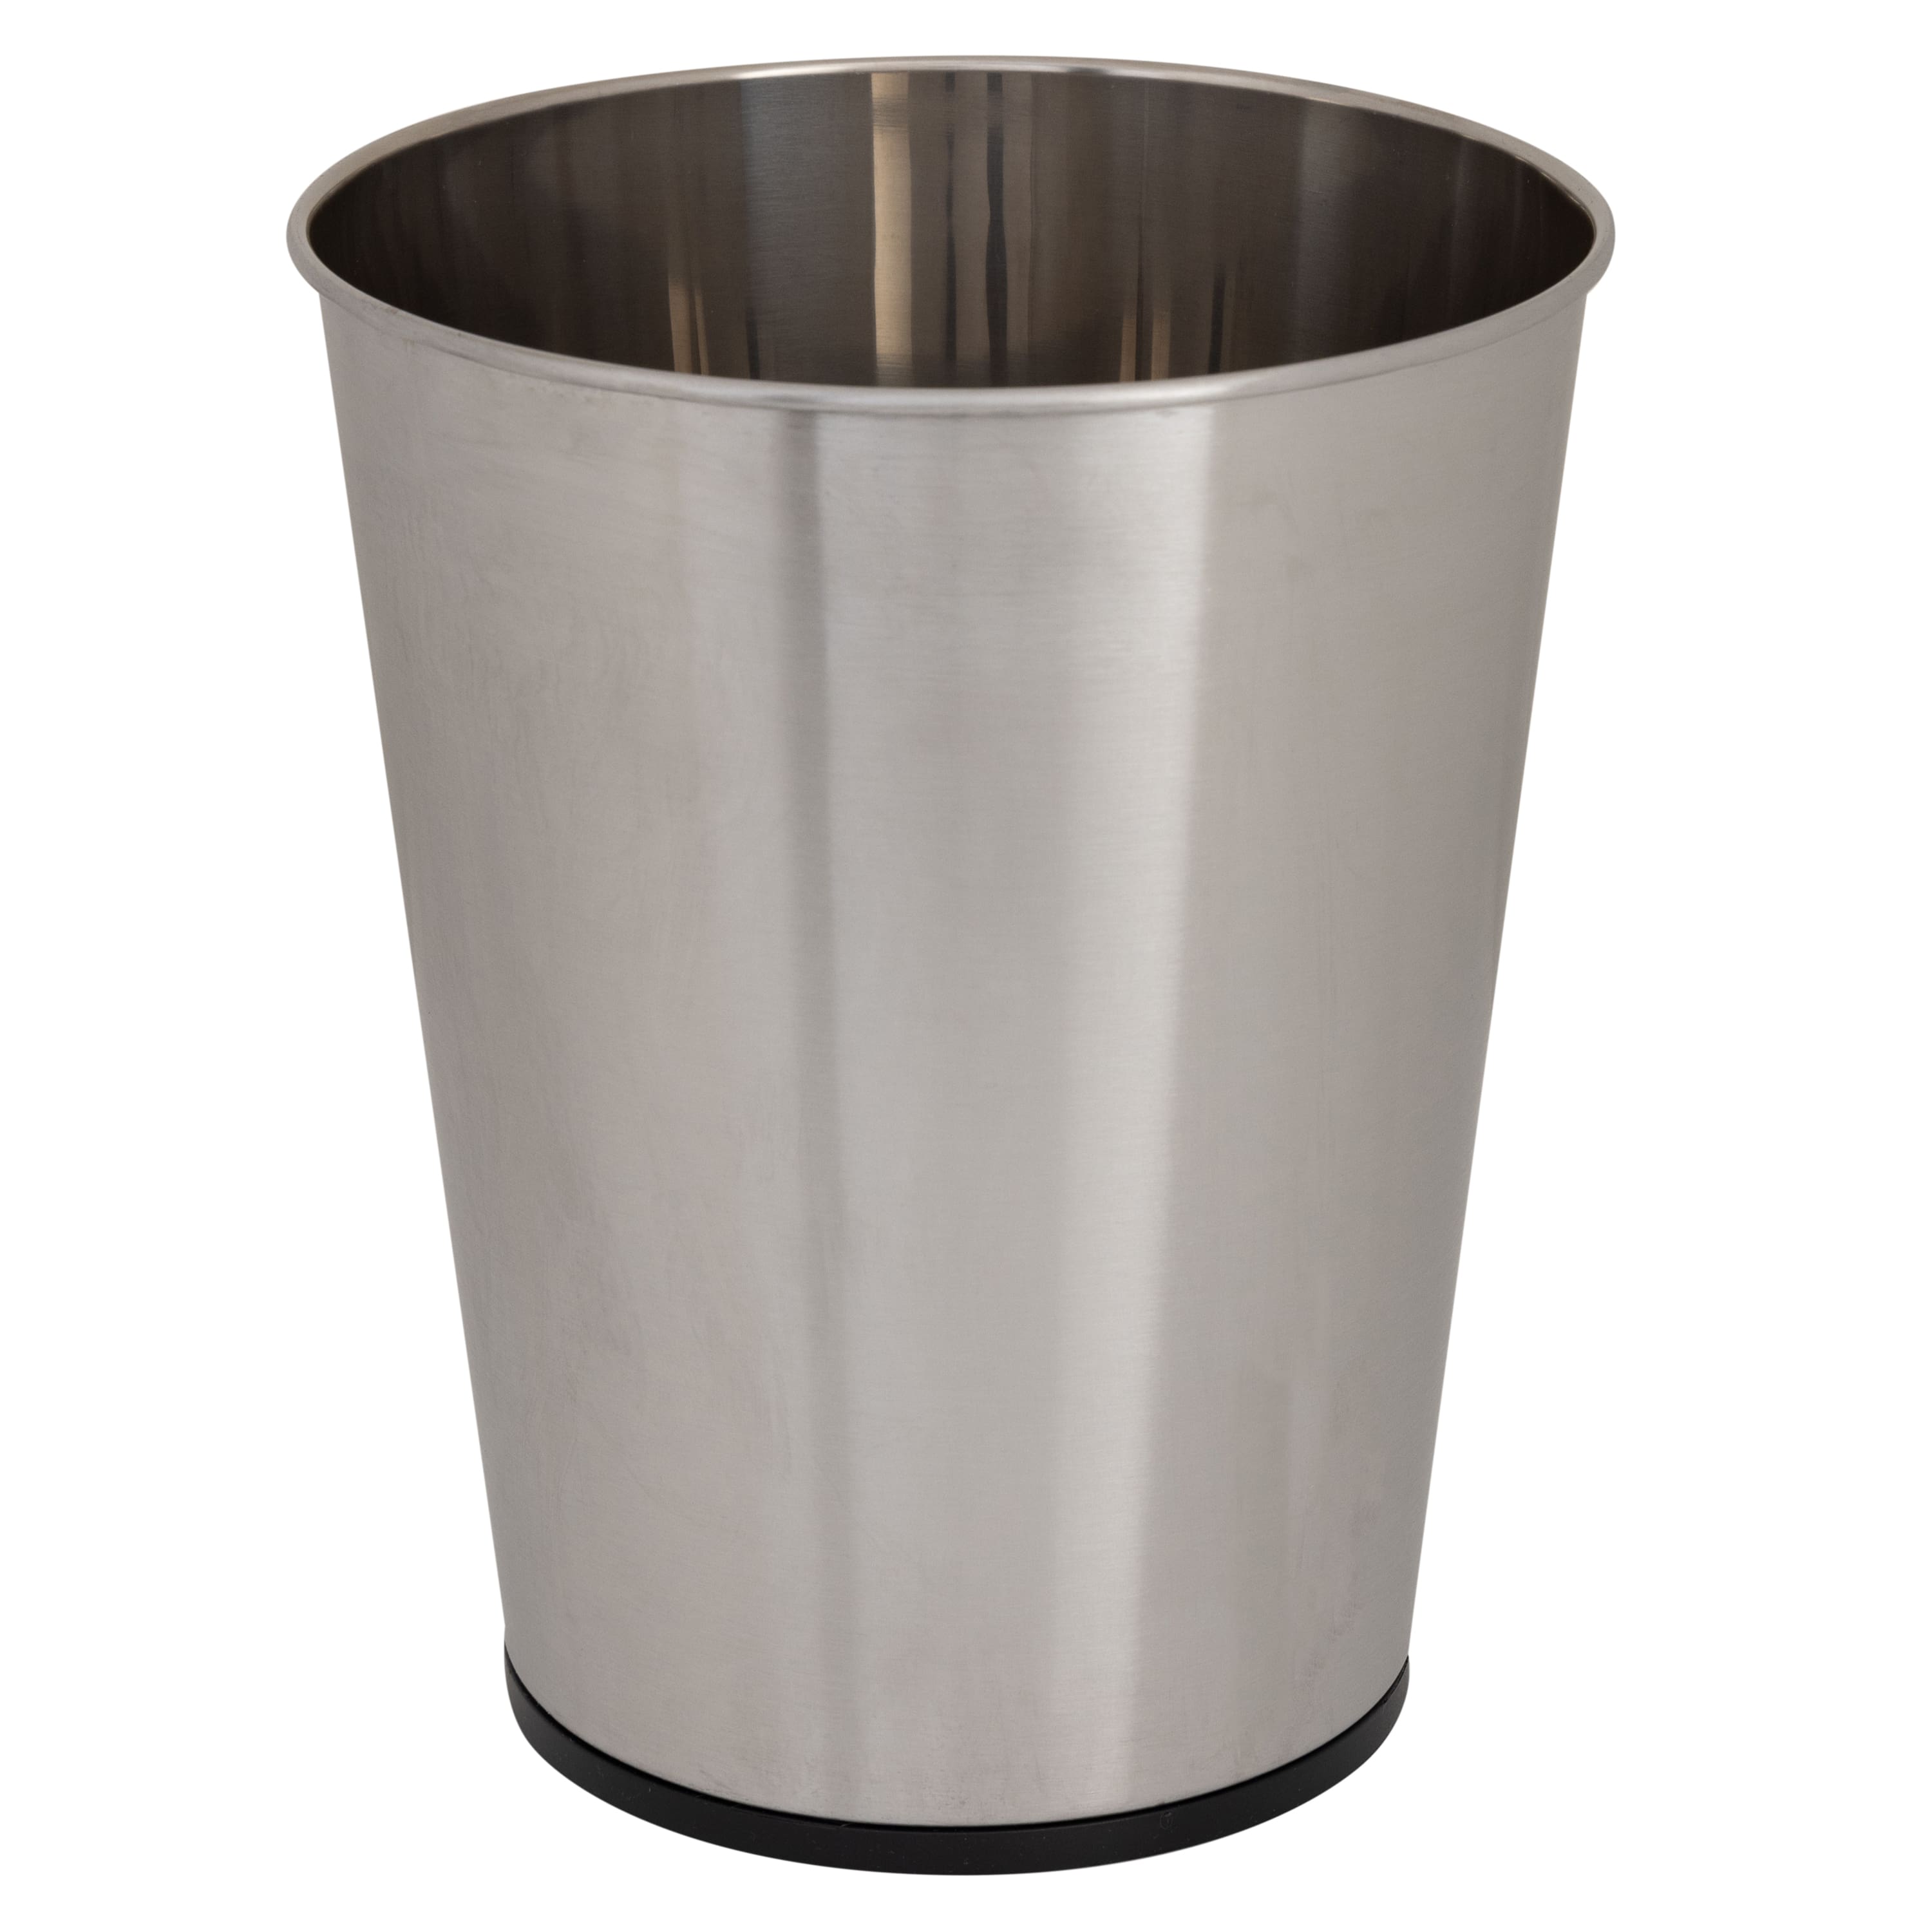 Bath Bliss Stainless Steel Trash Can